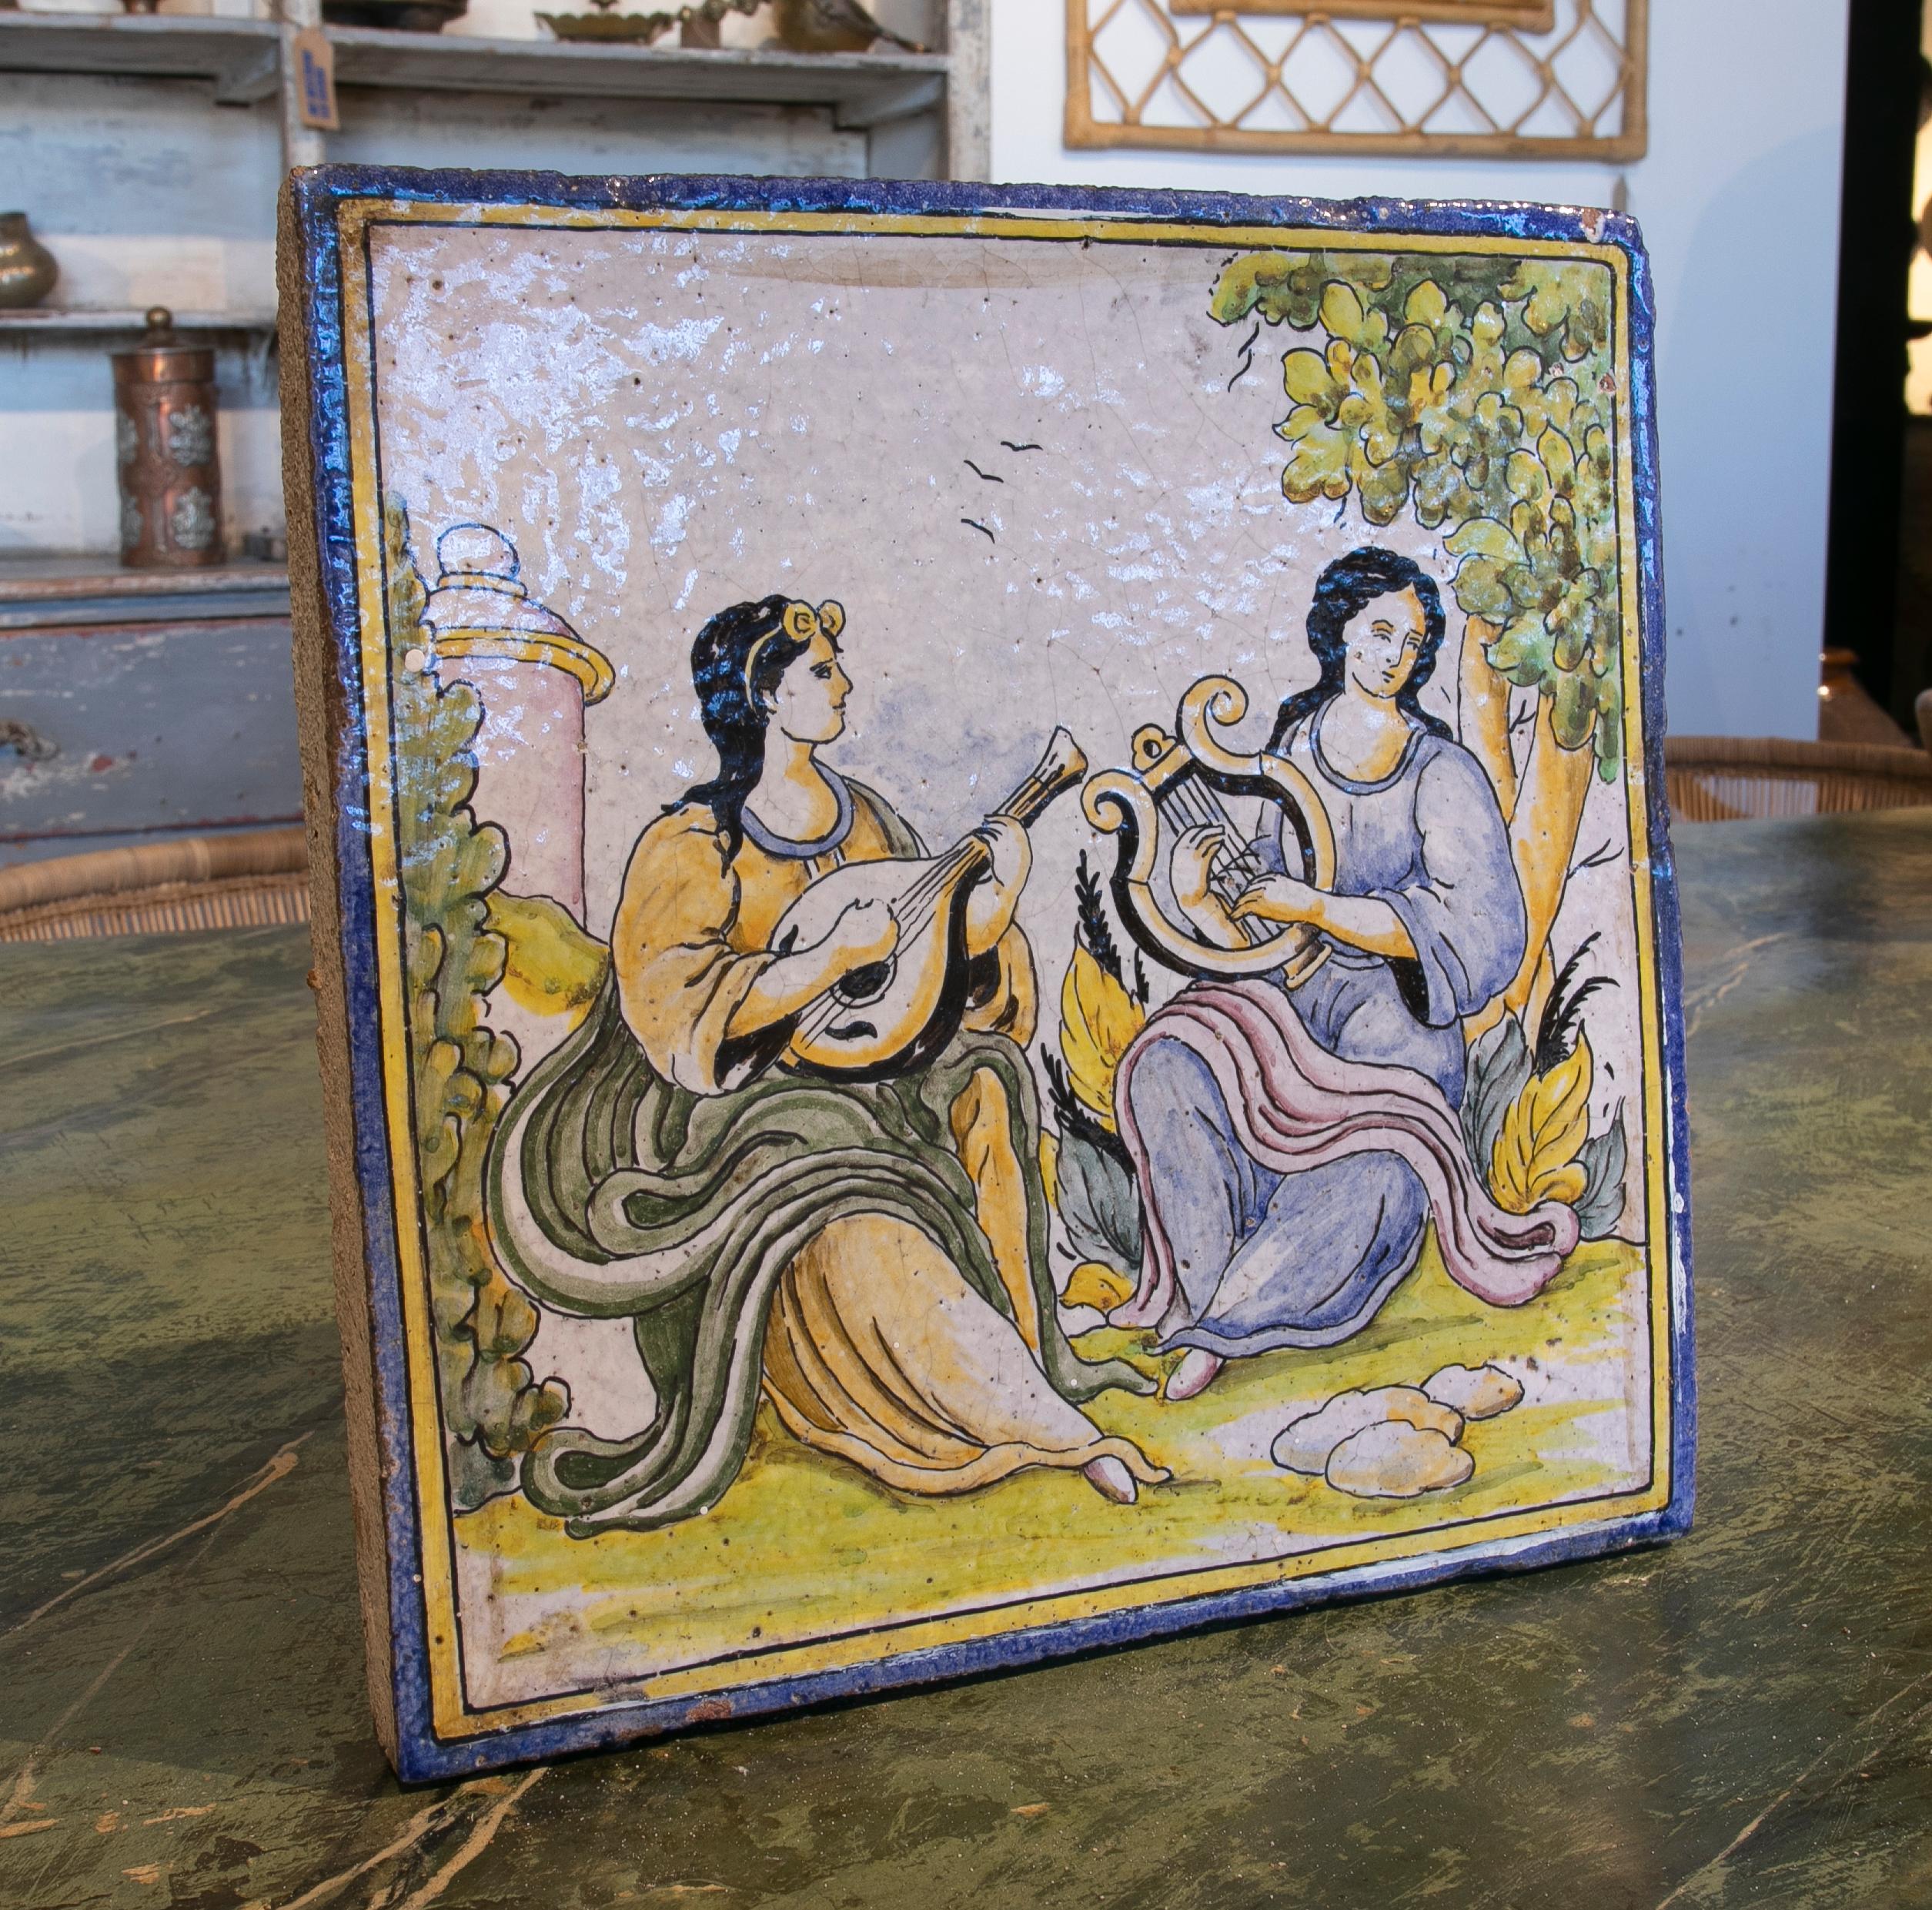 1970s Spanish hand painted glazed ceramic tile with people scene.